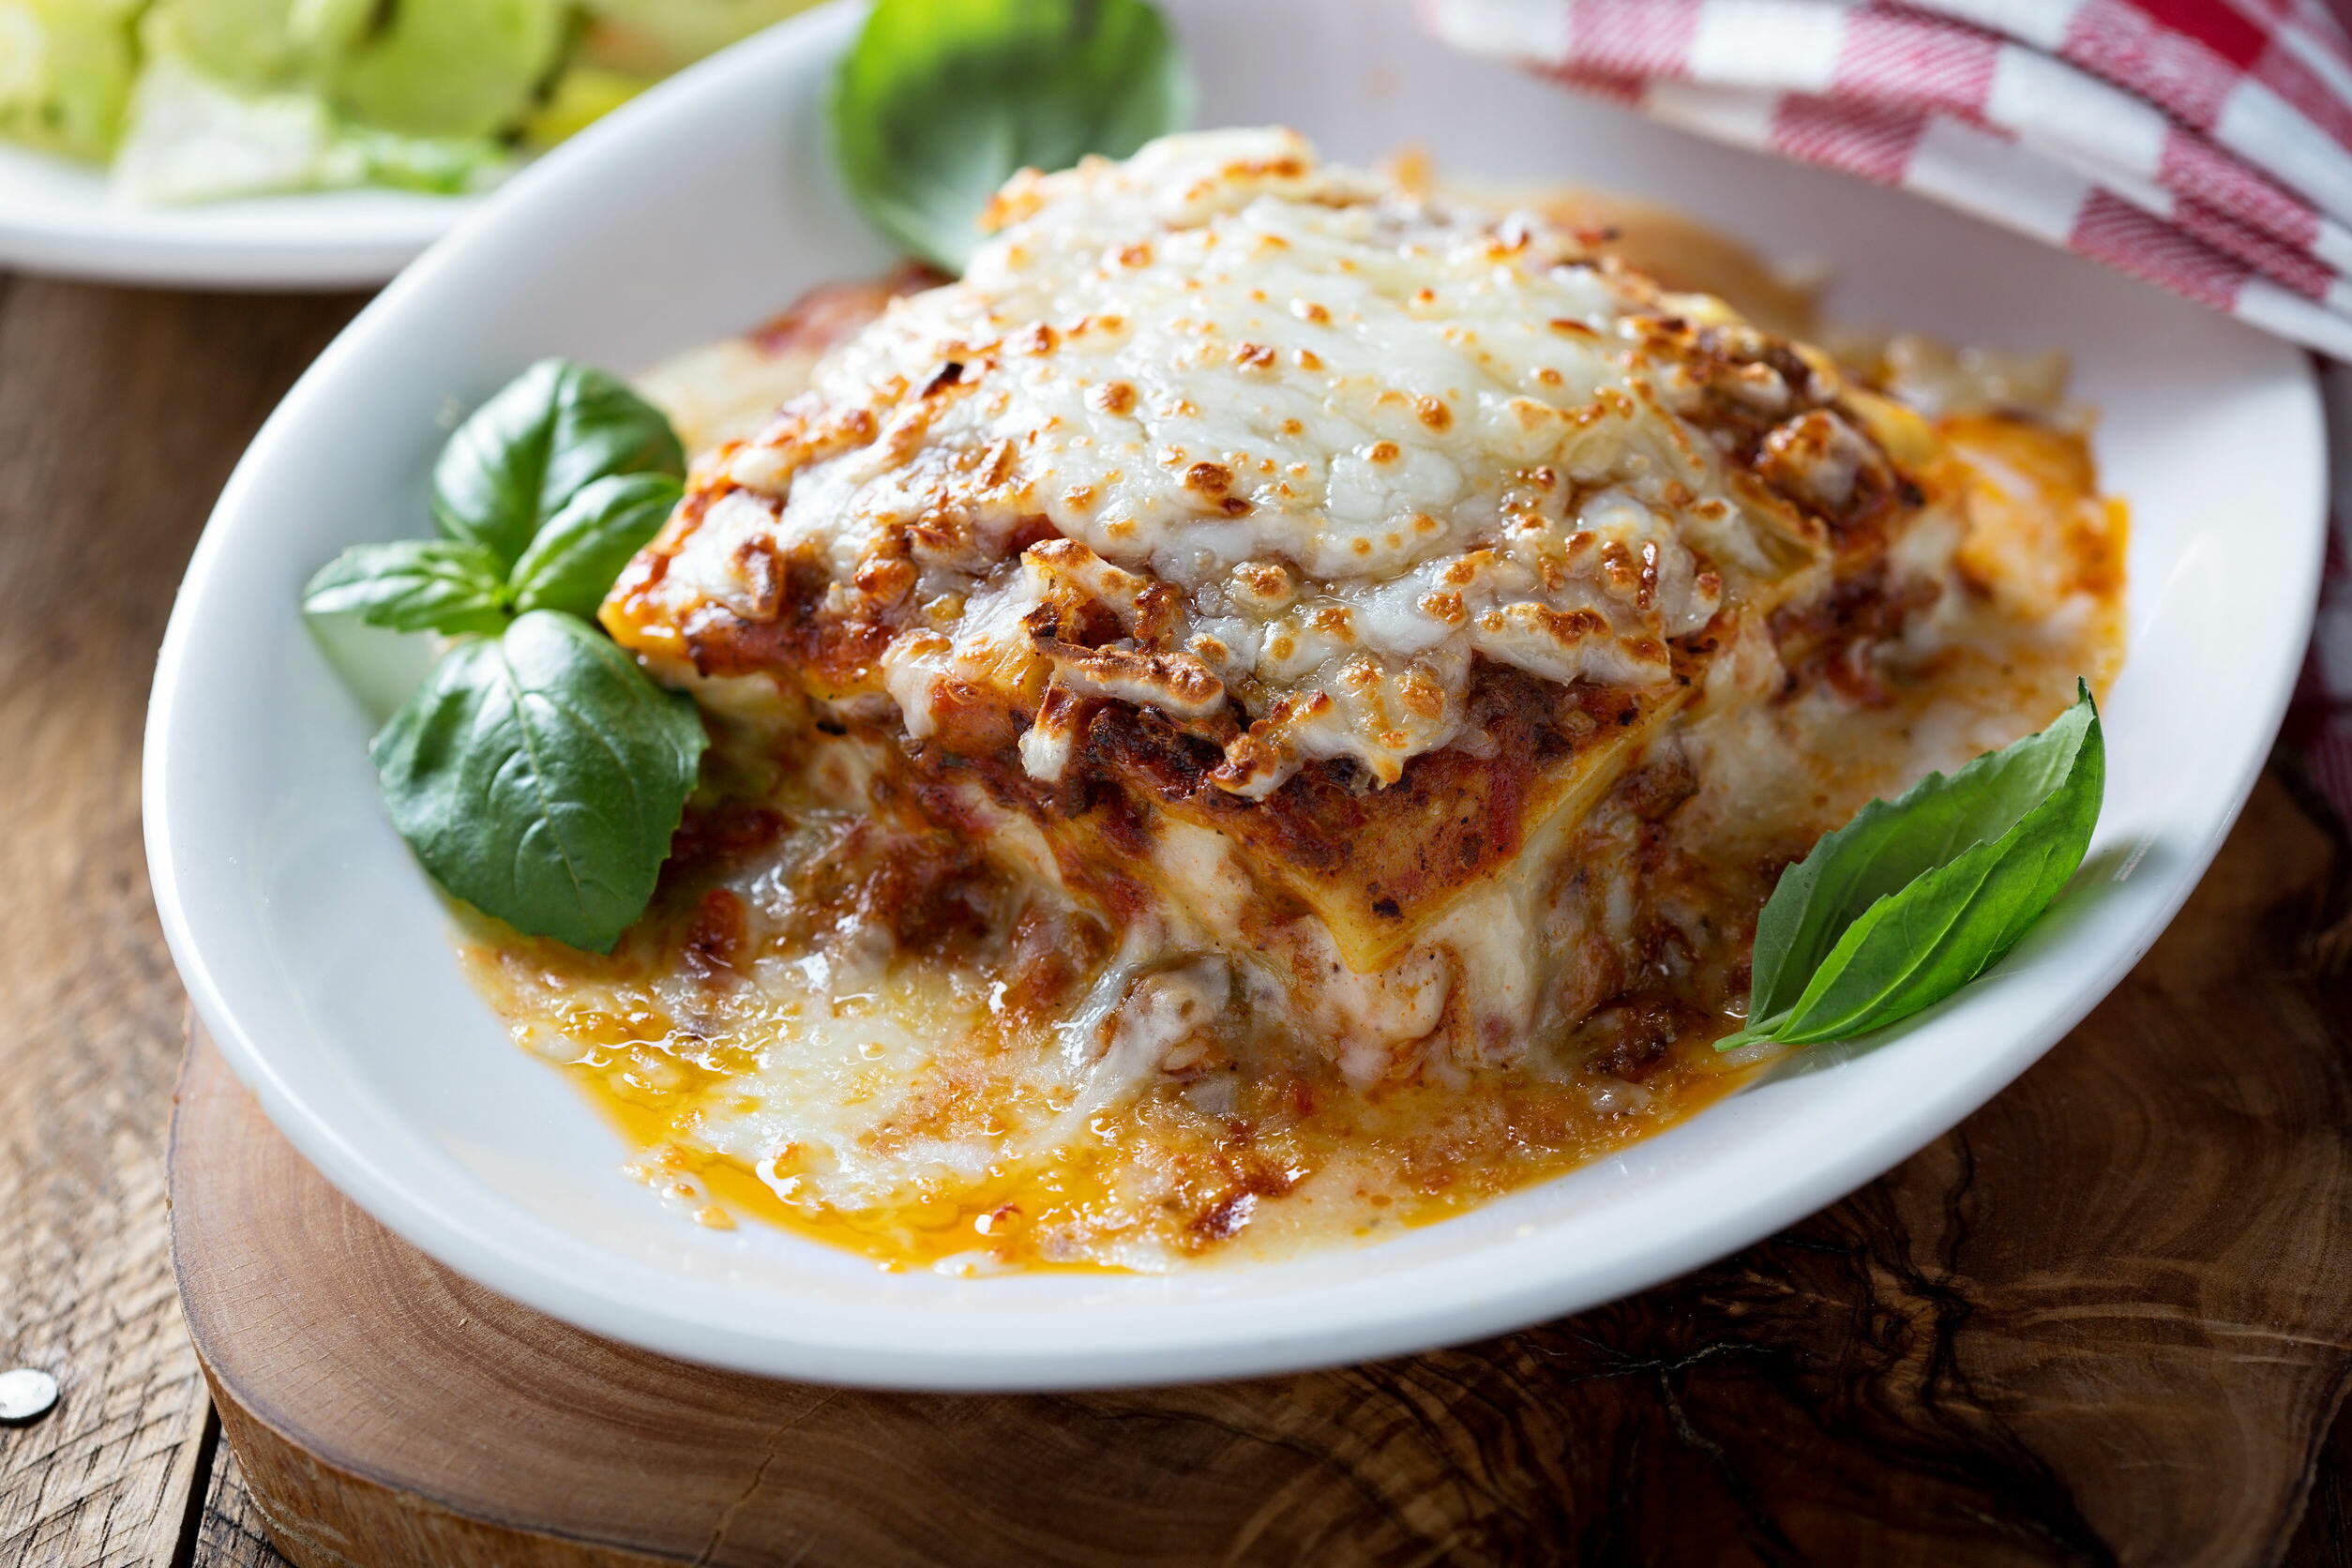 Traditional Beef Lasagna With Ricotta Cheese | RecipeLion.com